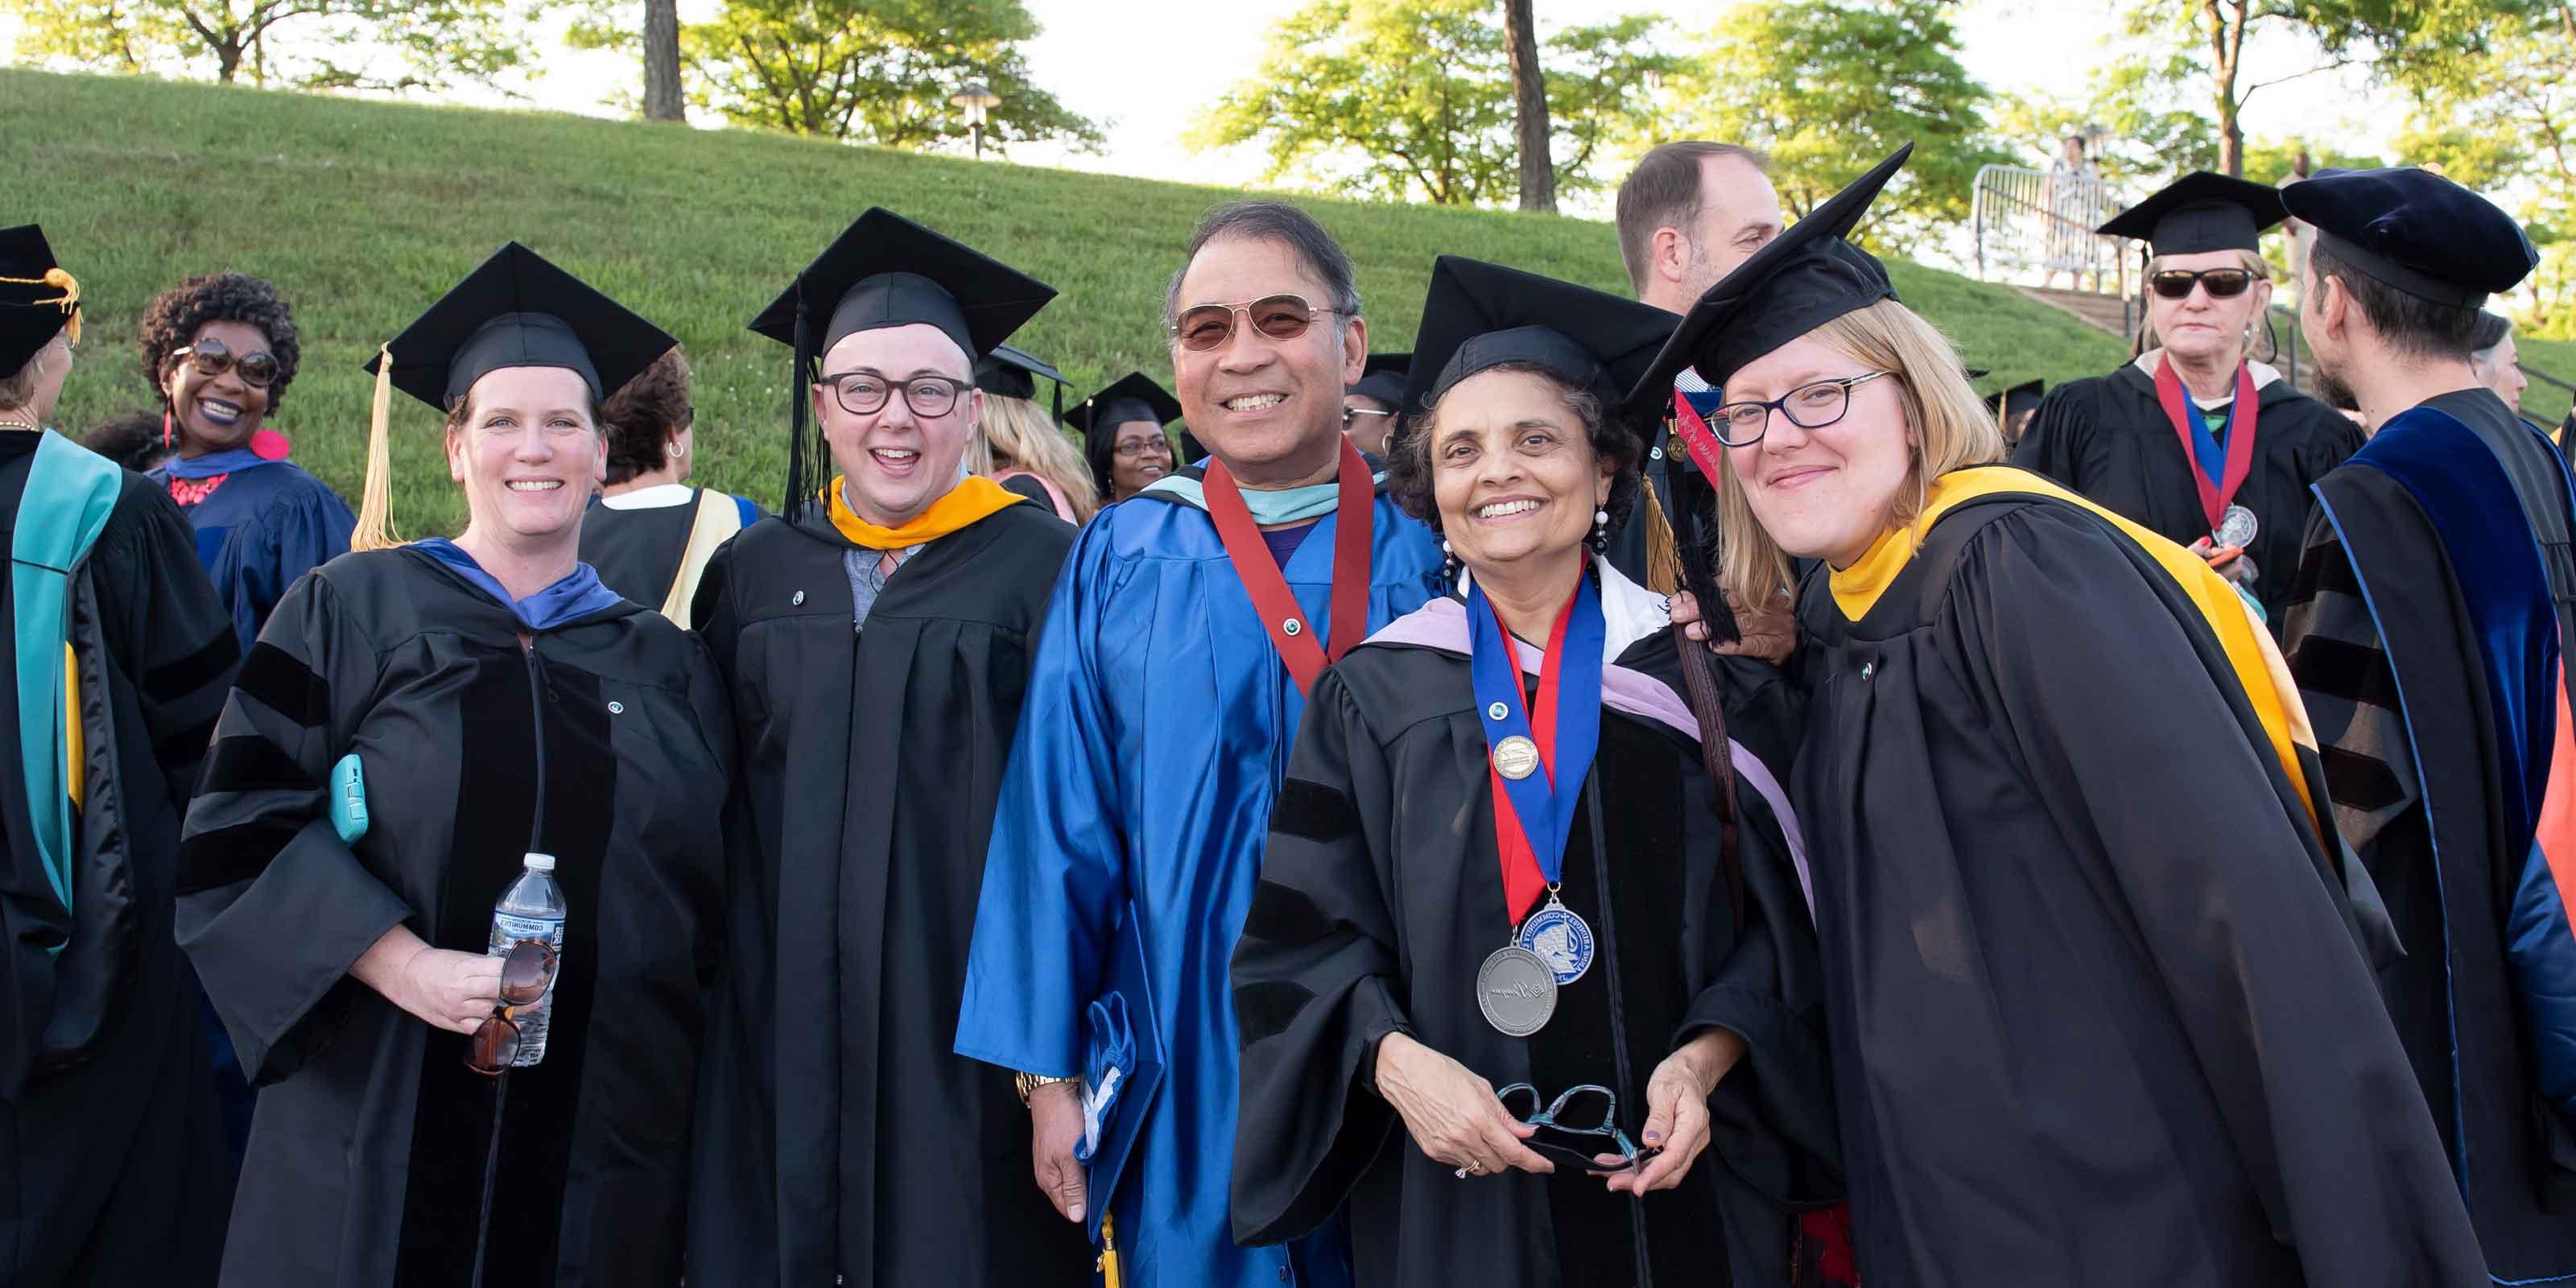 AACC faculty pose at commencement